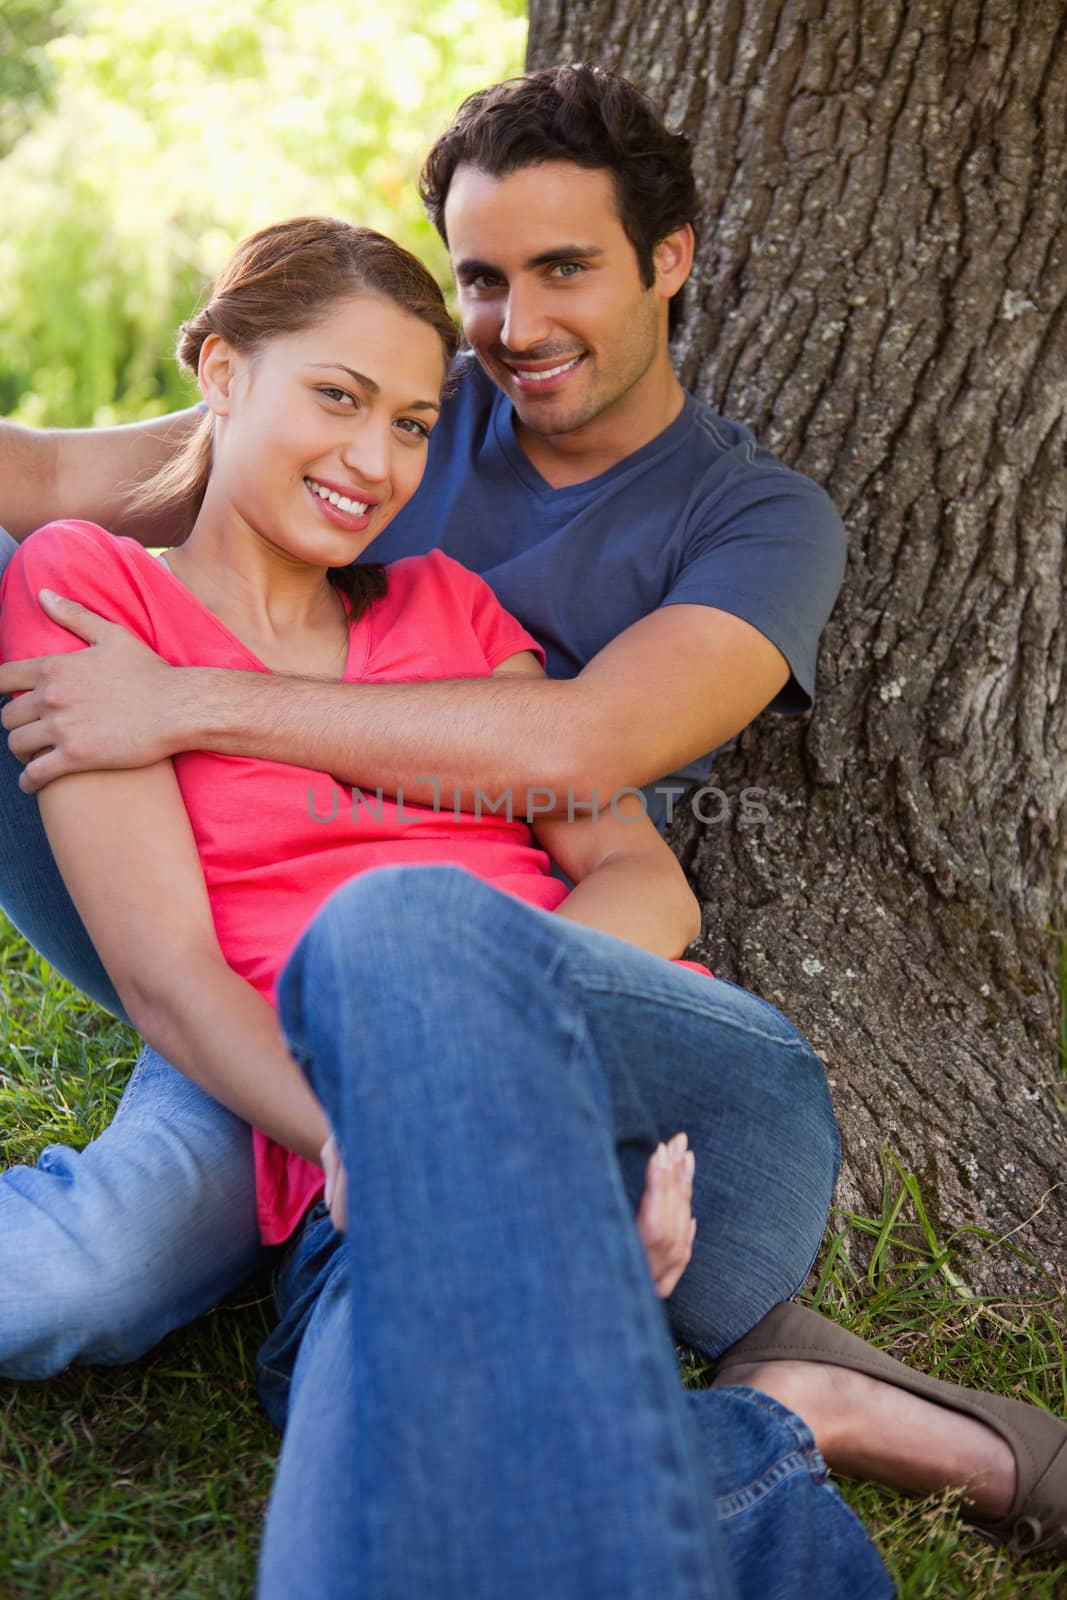 Man looking straight ahead as he holds his smiling friend while they sit together against the trunk of a tree